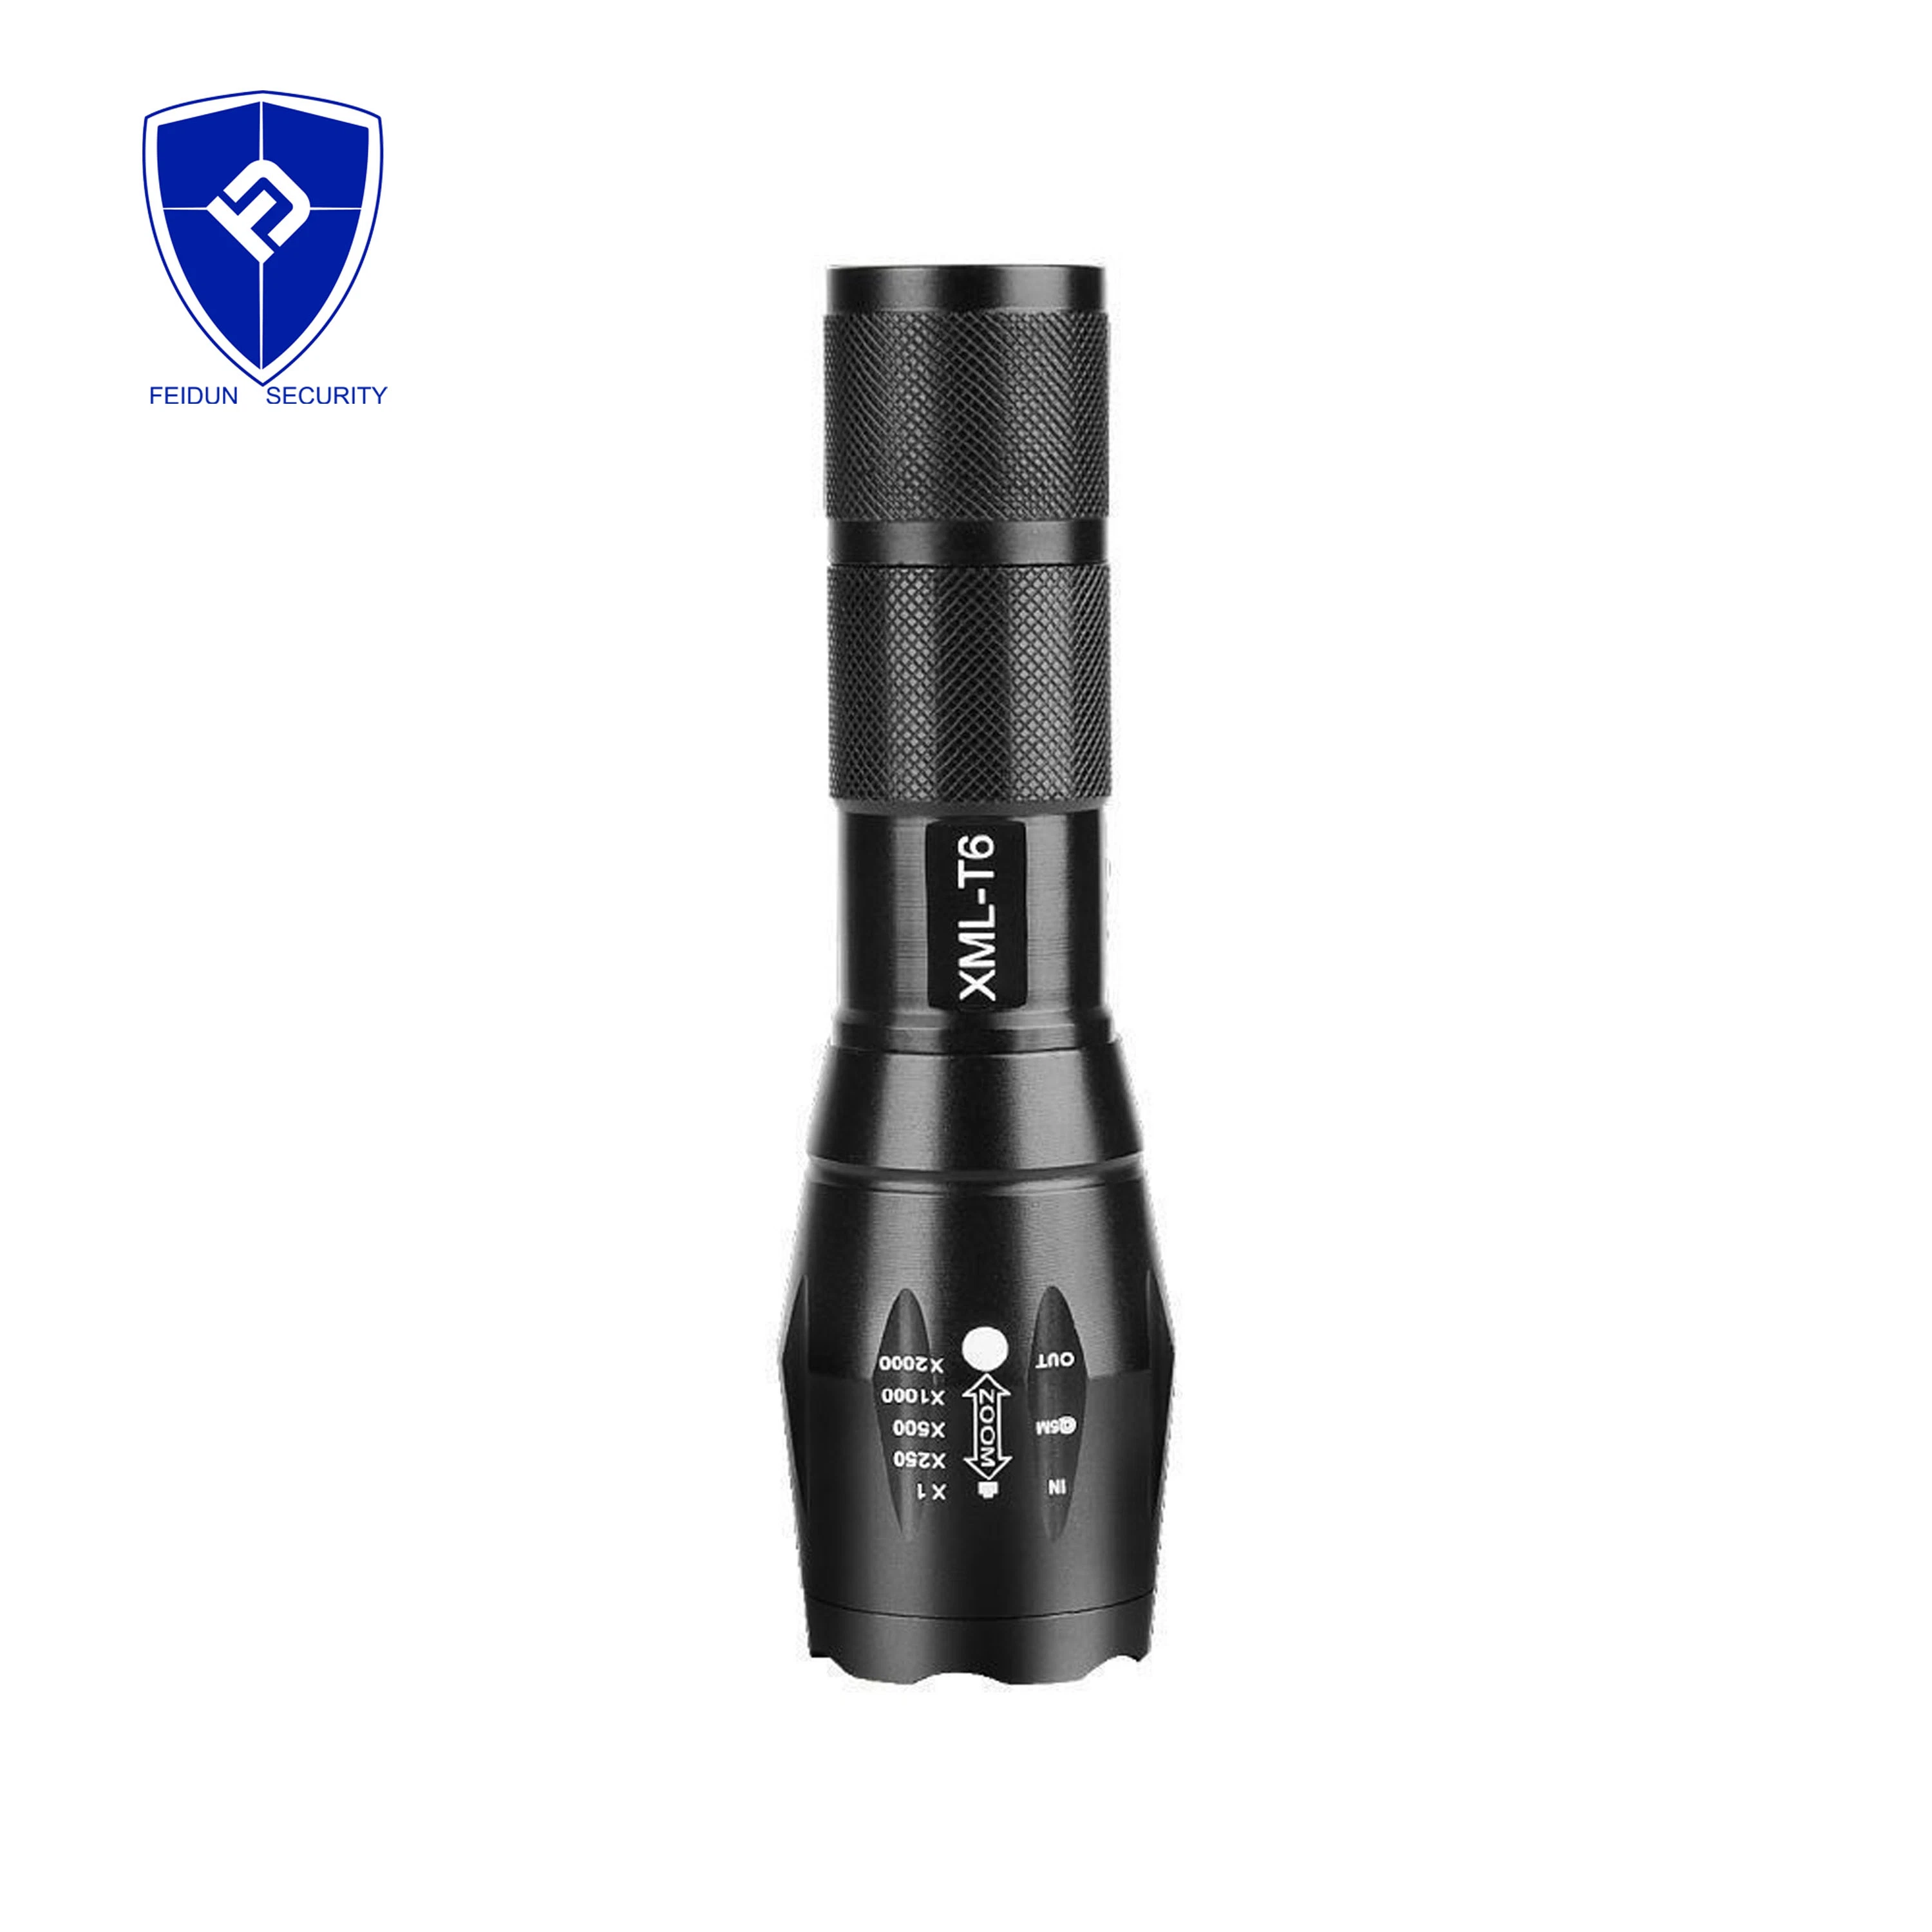 Hand LED Torch Light Outdoor 1200 Lumen Xml T6 Waterproof LED Zoomable Military-Tactical Self Defensive Camping Flashlight